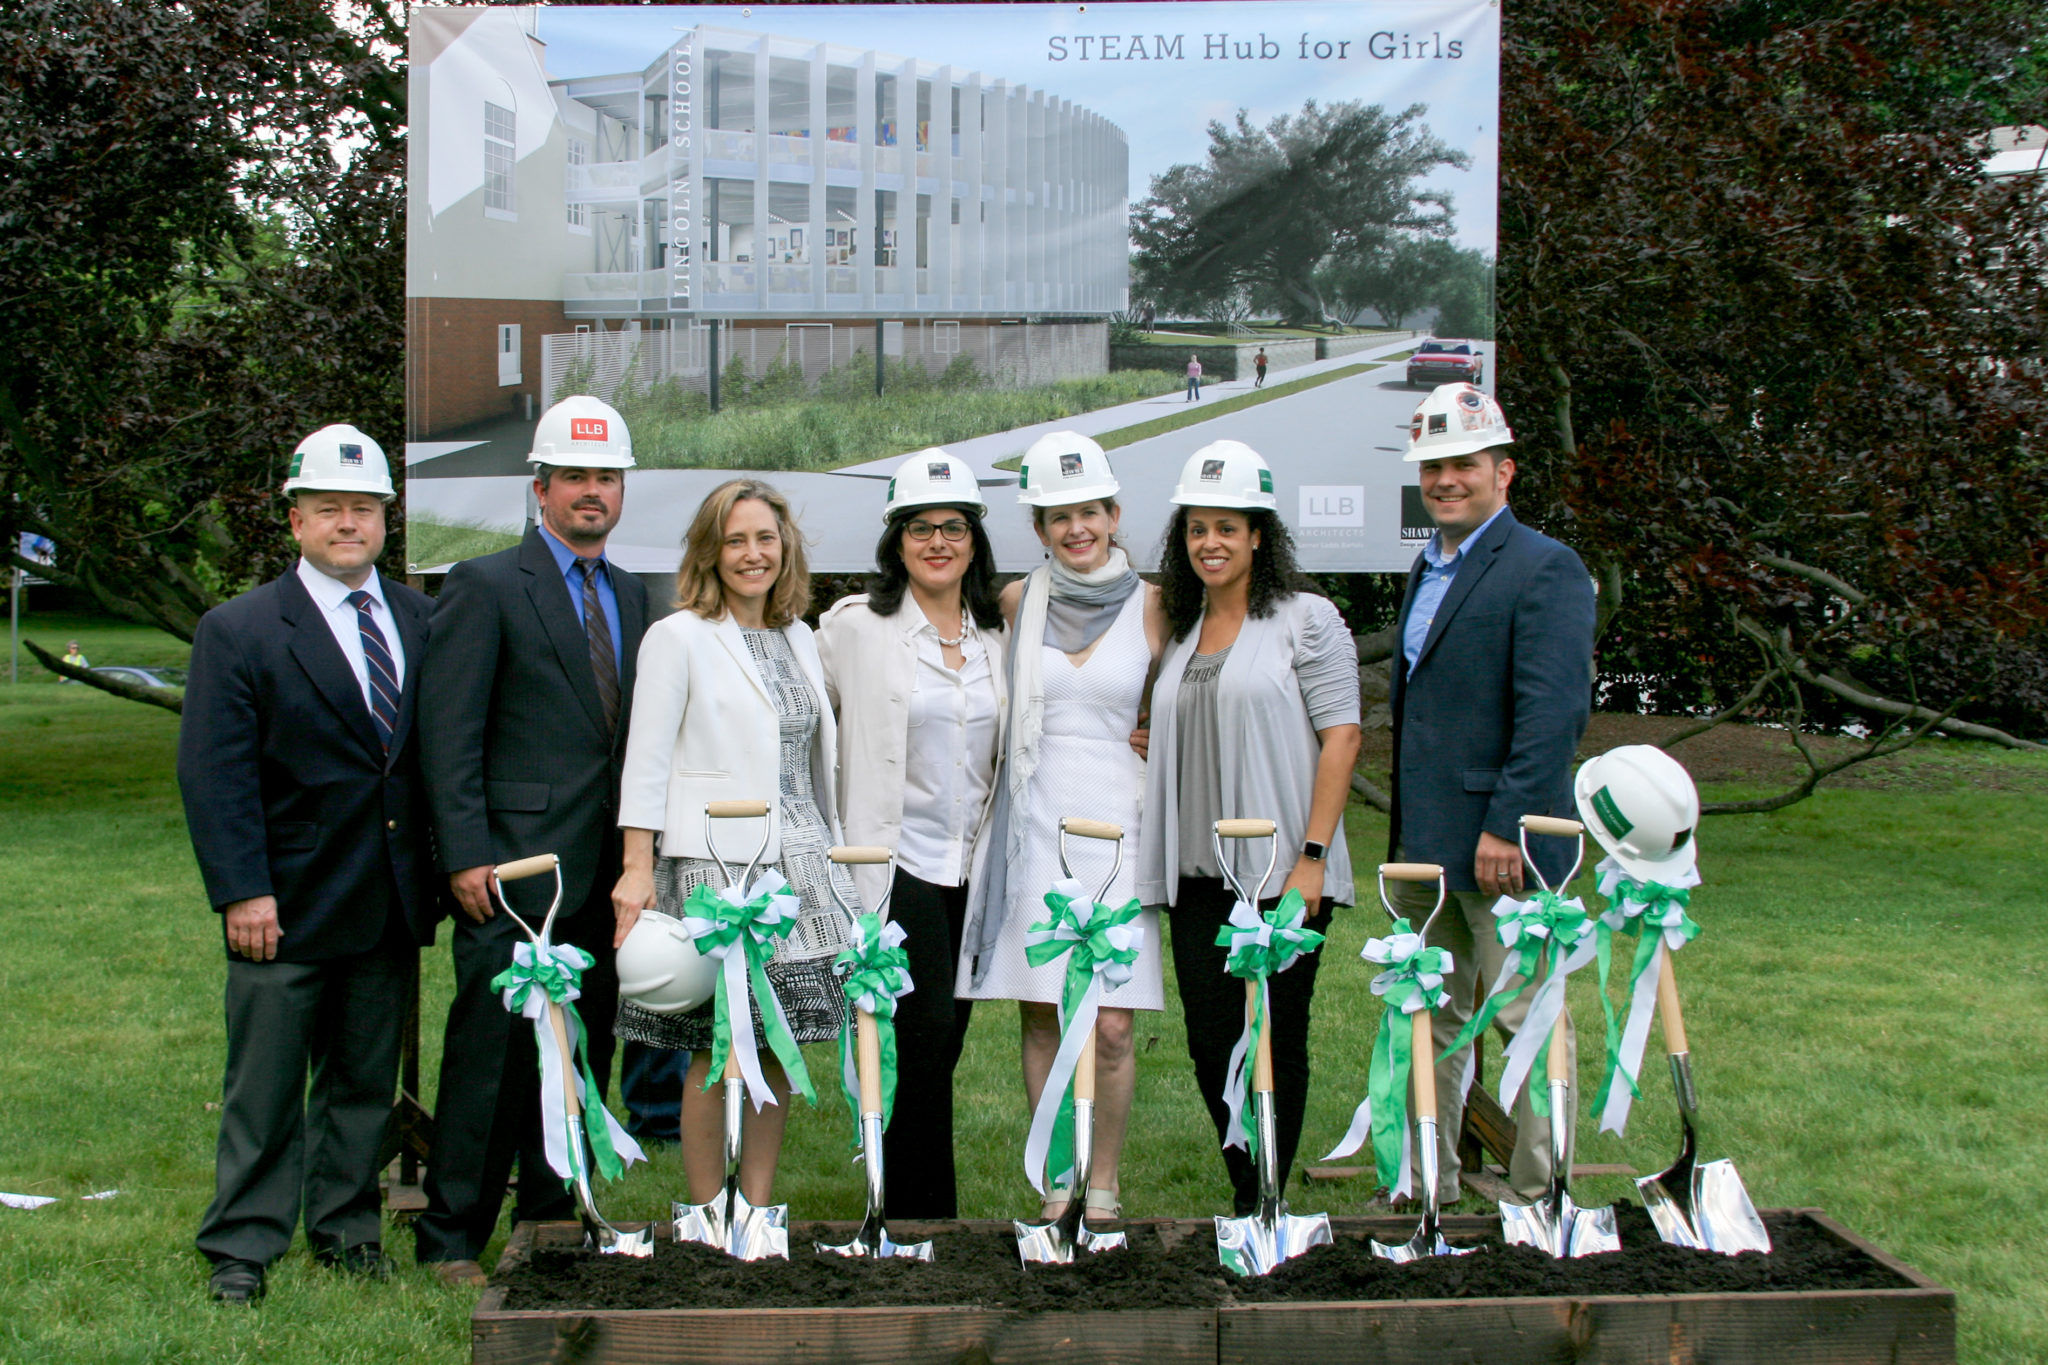 THE LINCOLN SCHOOL BROKE GROUND on its new STEAM building. From left, Ron Simoneau, vice president, Shawmut Design and Construction; Brian Valentine, project manager, LLB Architects; Kathleen Bartels, principal, LLB Architects; Nancy Nahigian Tavitian, chair, Lincoln School's STEAM Hub Steering Committee; Suzanne Fogarty, head of school, Lincoln School; Corine Andrade, project manager, Shawmut Design and Construction; Chris Maury, project executive, Shawmut Design and Construction /COURTESY SHAWMUT DESIGN AND CONSTRUCTION